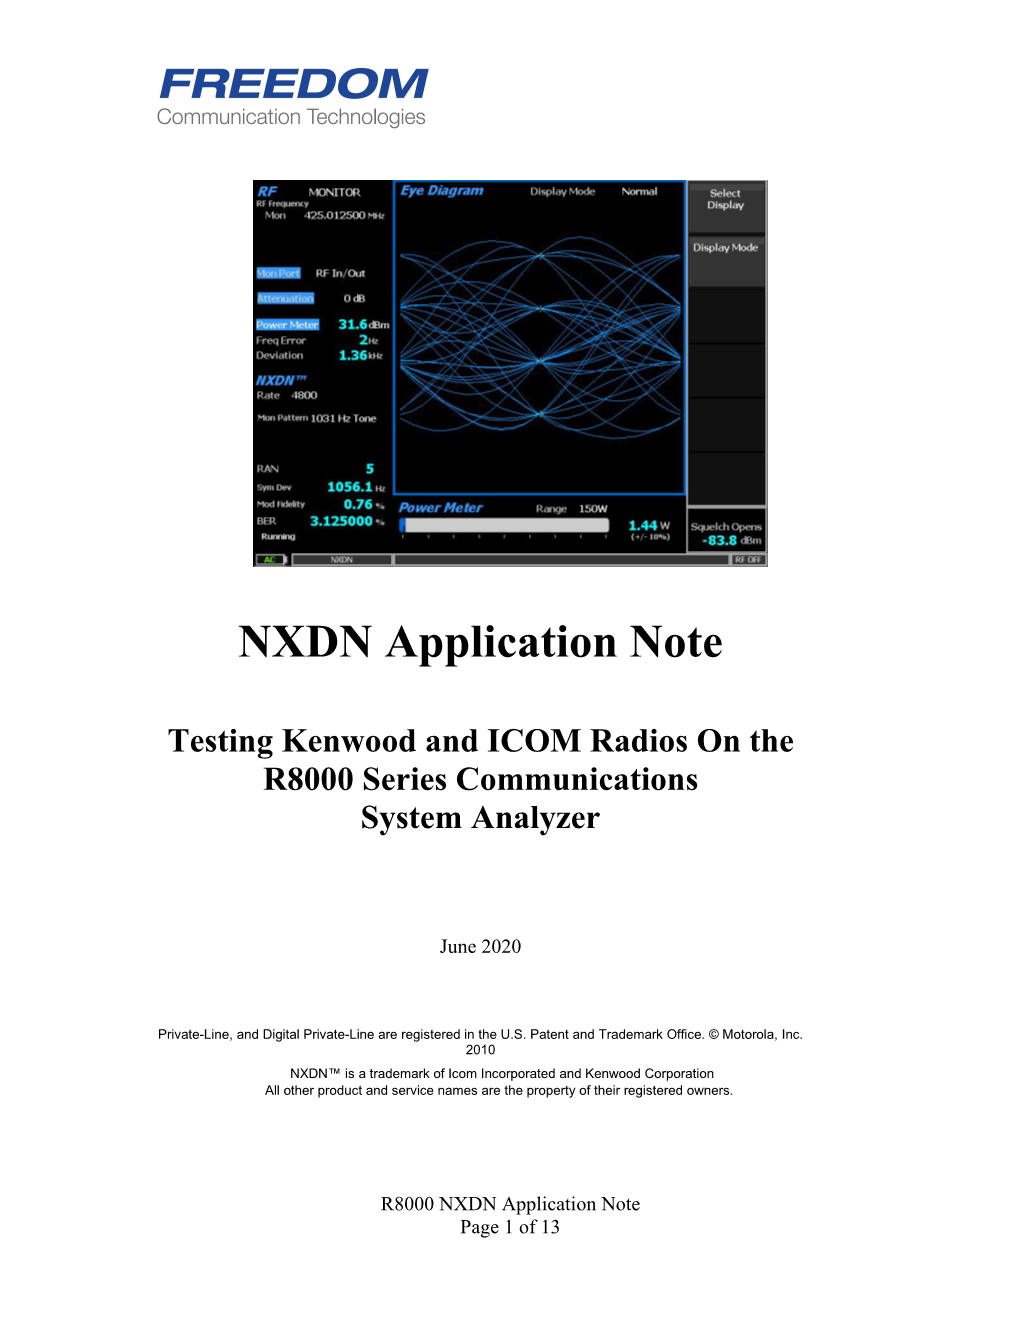 NXDN Application Note